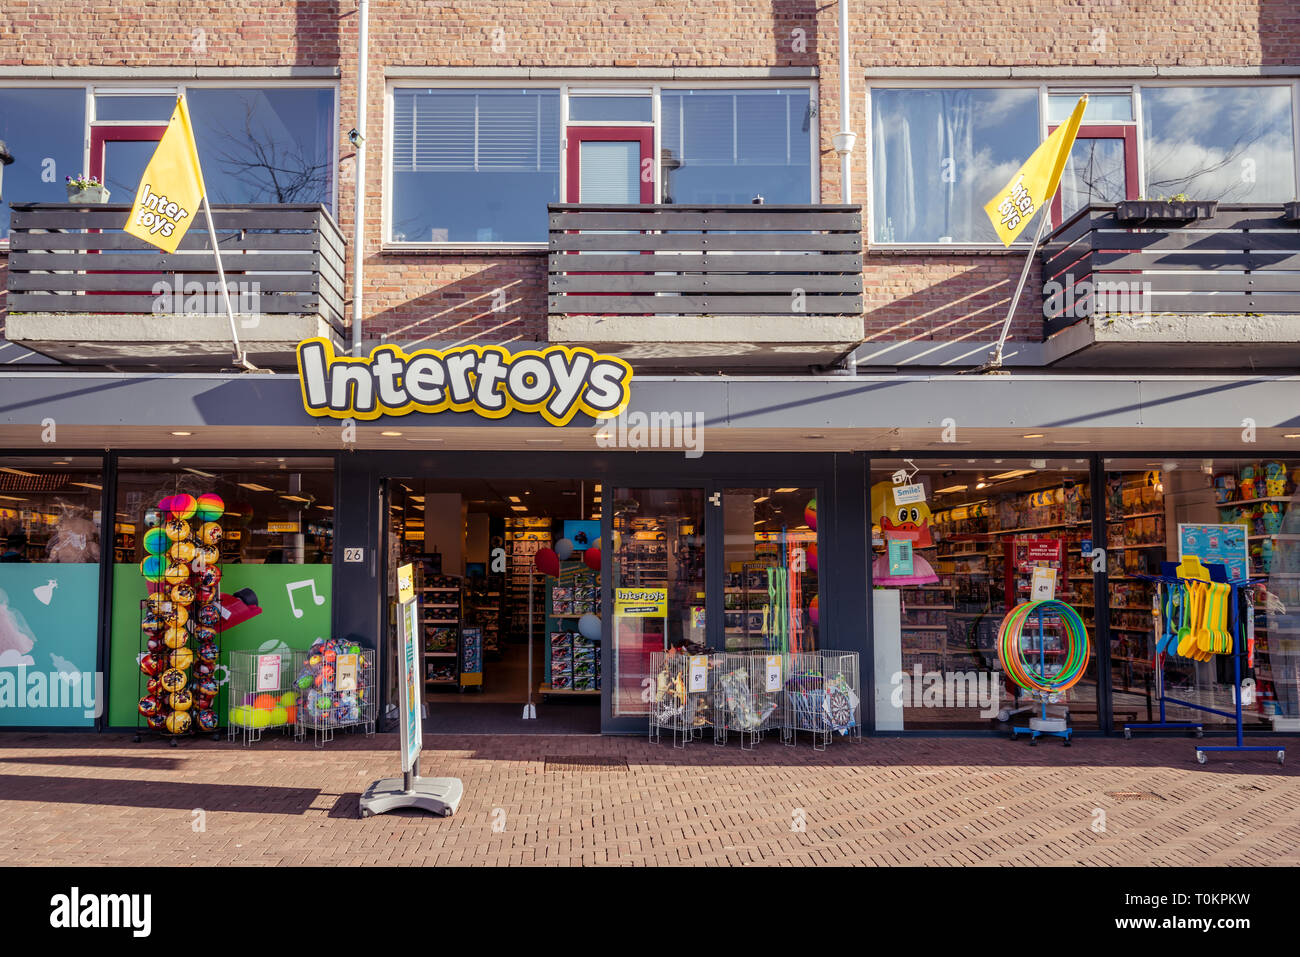 Dordrecht, The Netherlands - March 03, 2019: Street view of the Intertoys storefront and products displayed. Intertoys is a large retail store chain s Stock Photo